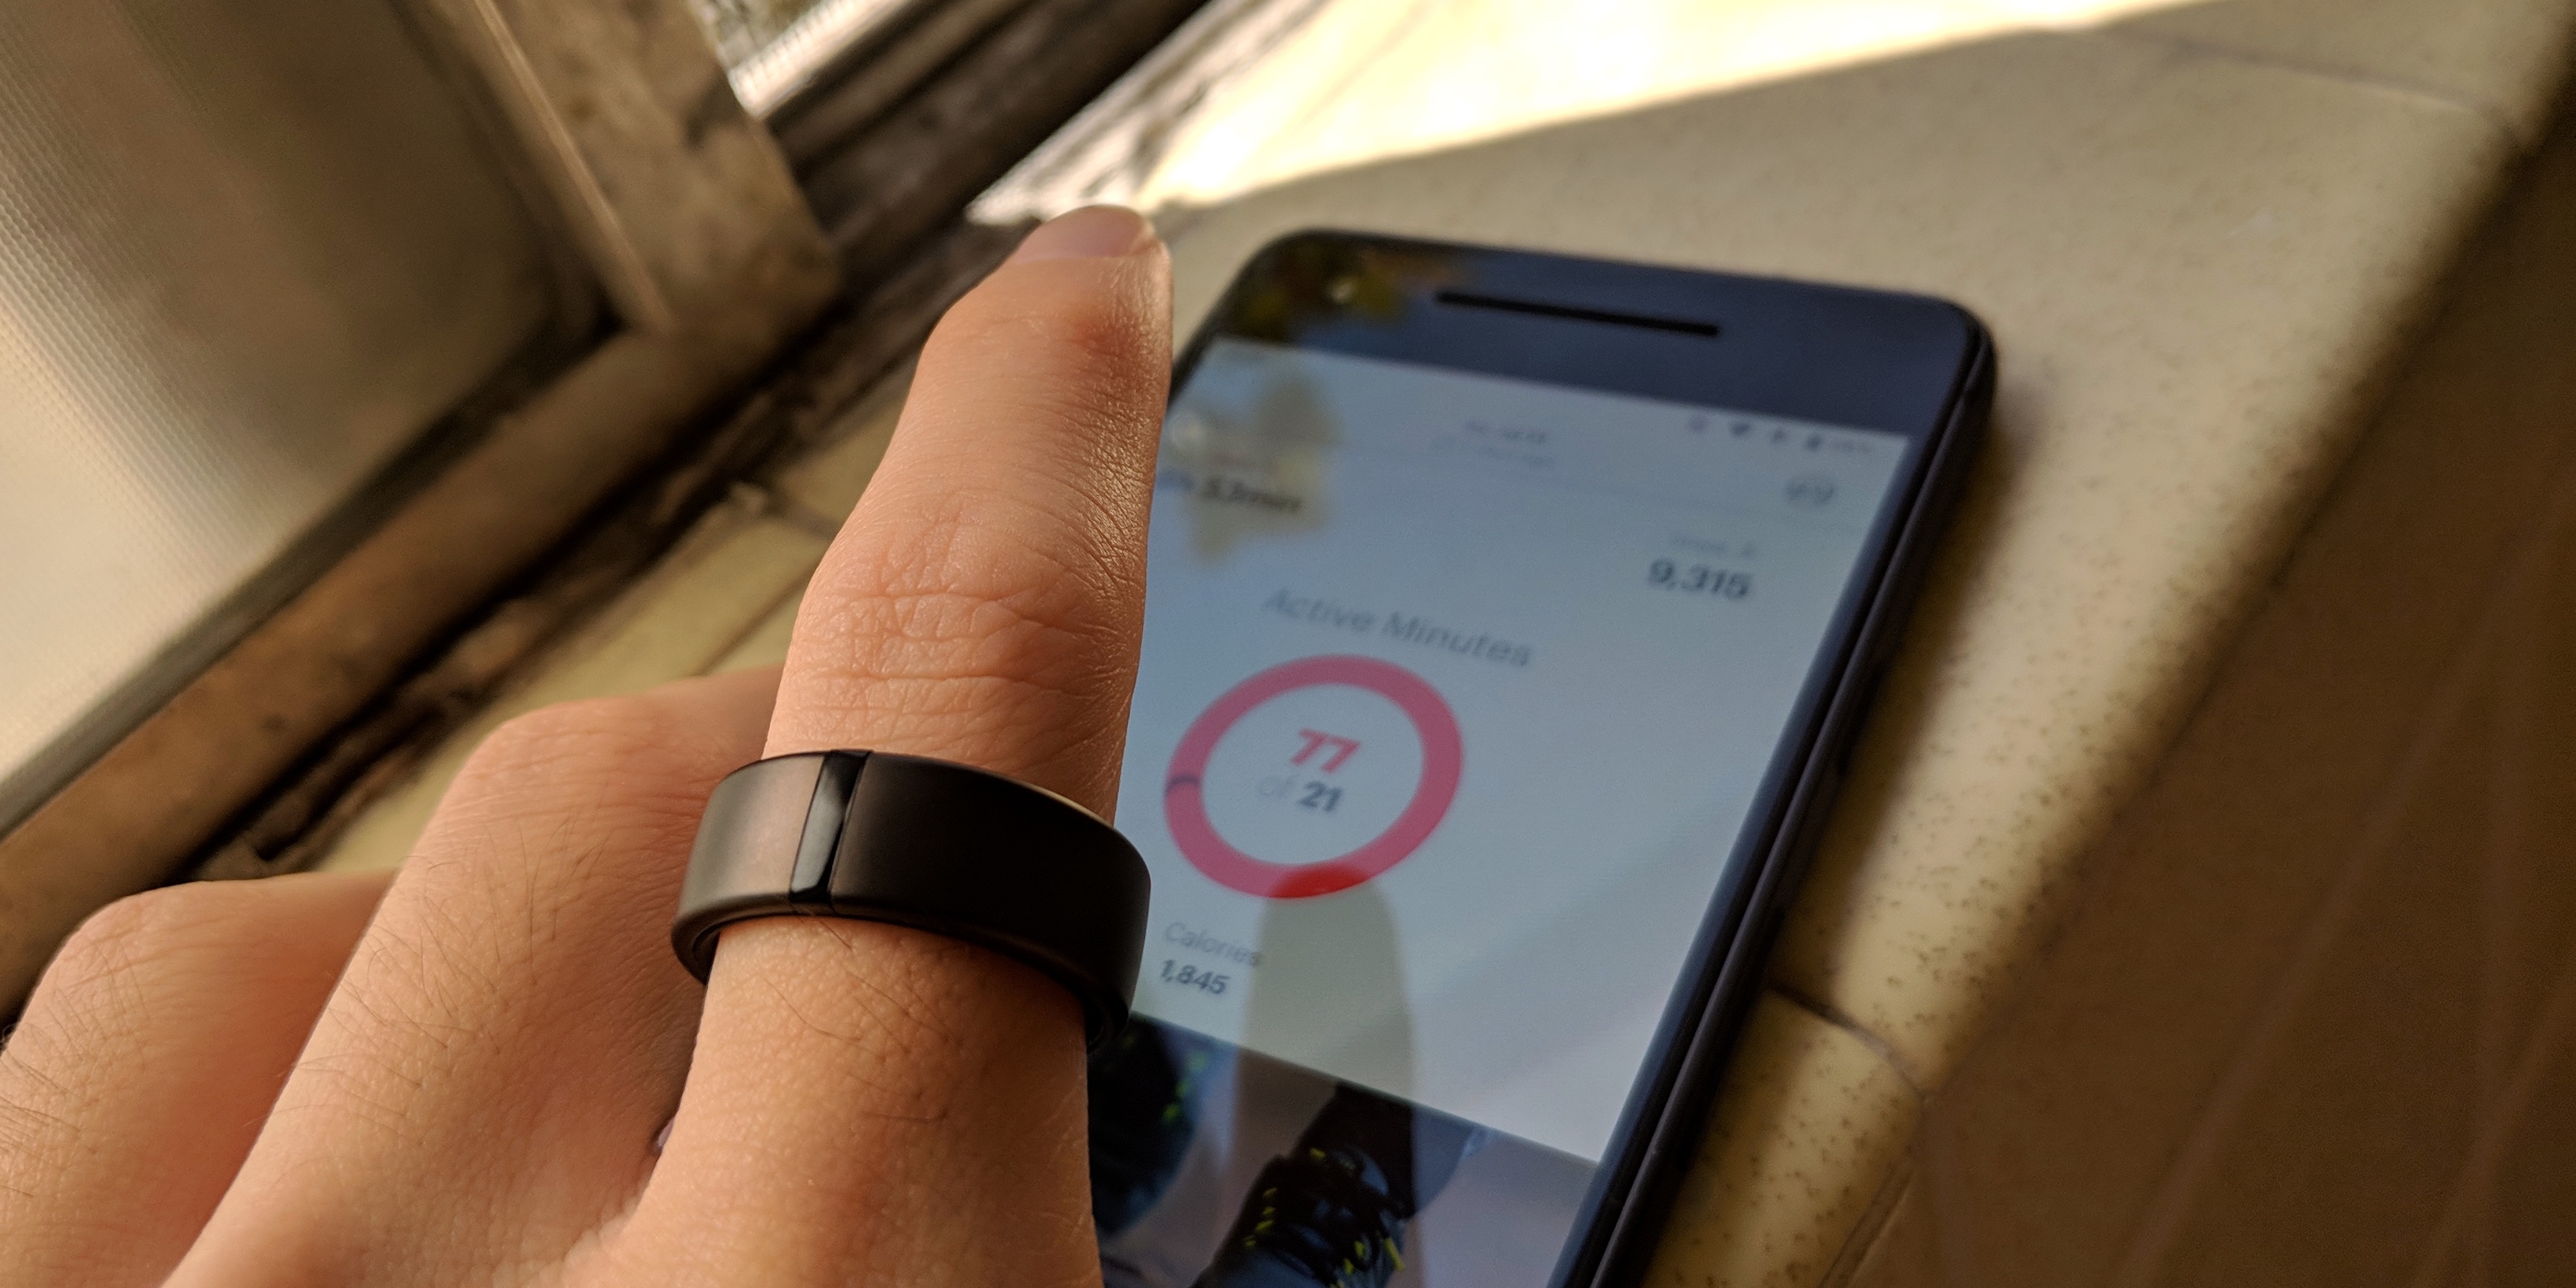 fitness trackers for google fit